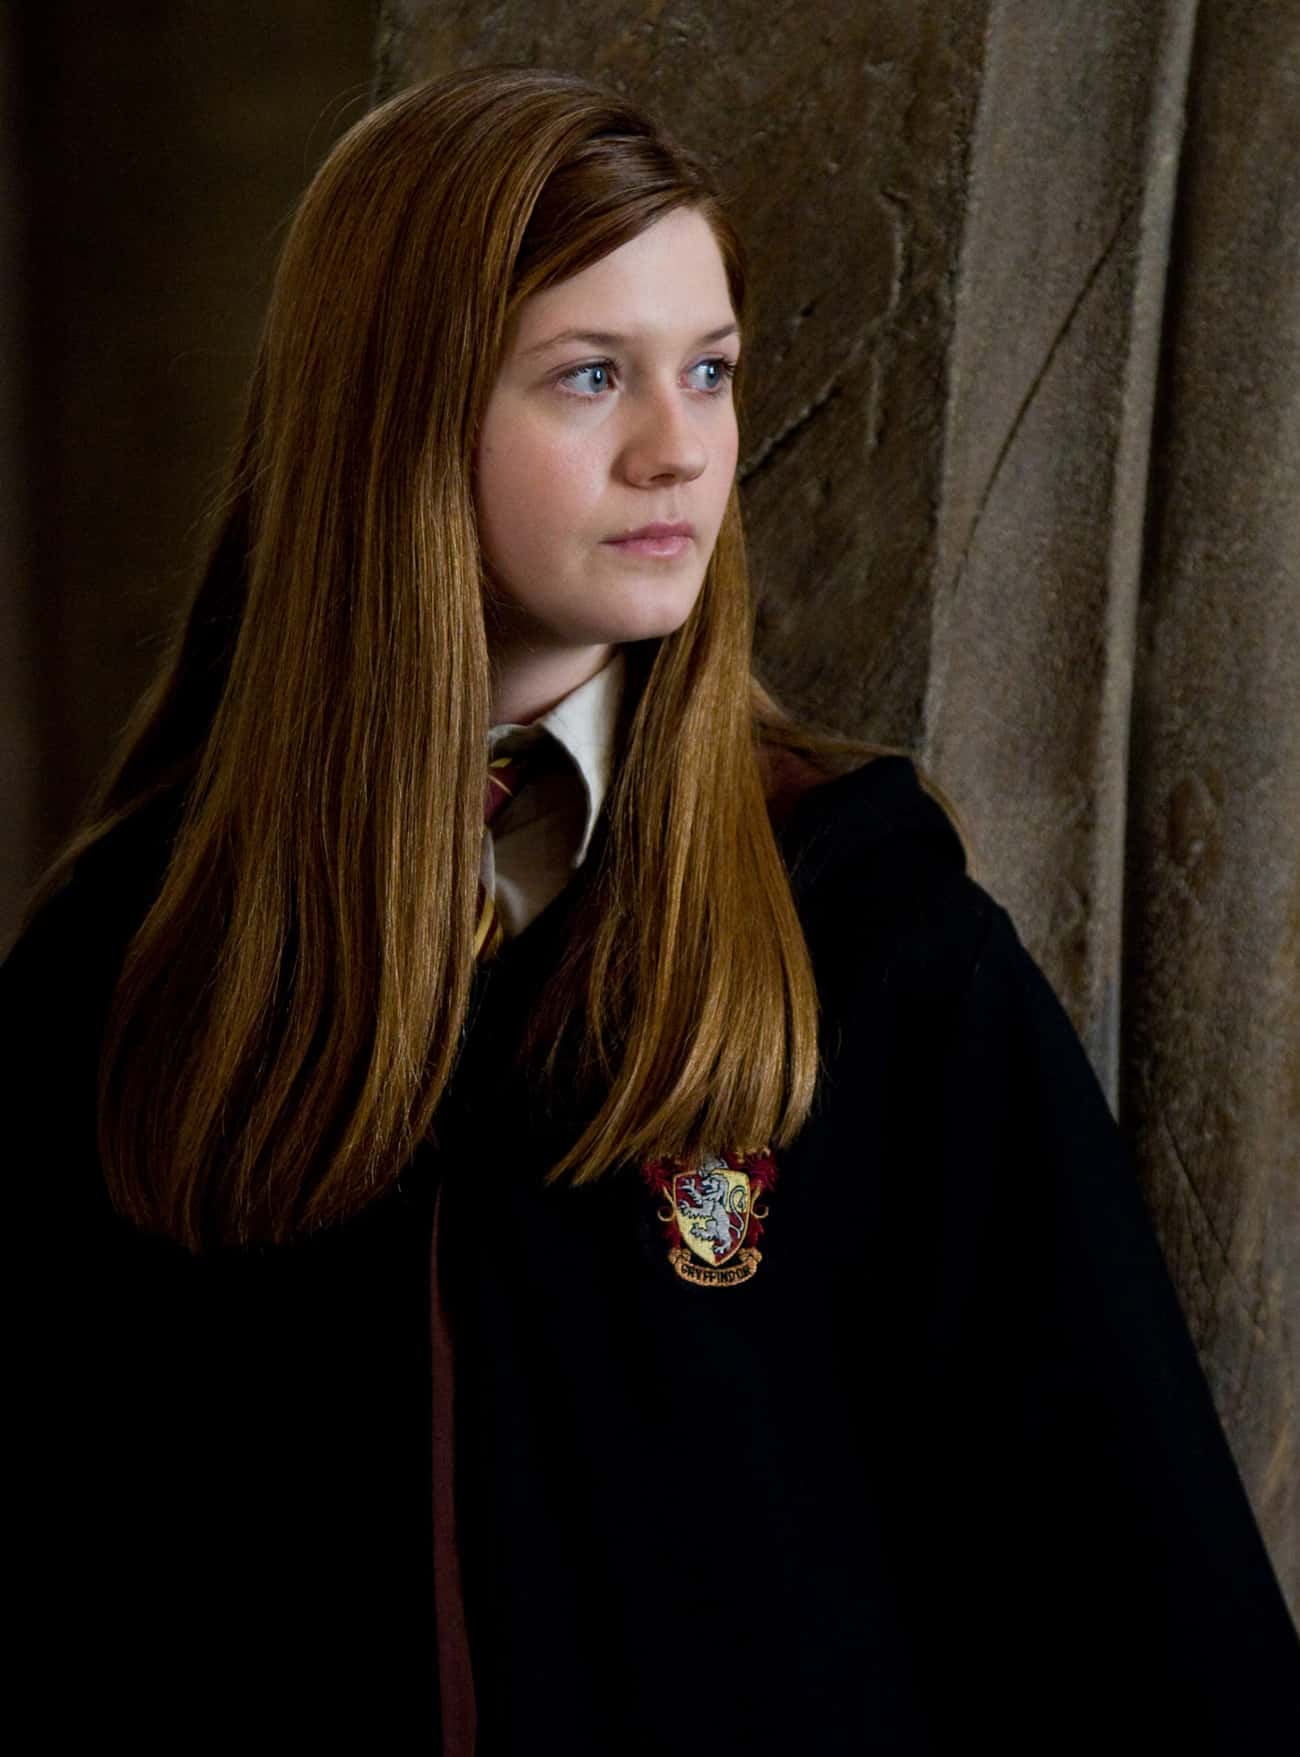 Ginny Weasley In The Movies: Blue-Eyed Brunette With Fair Skin